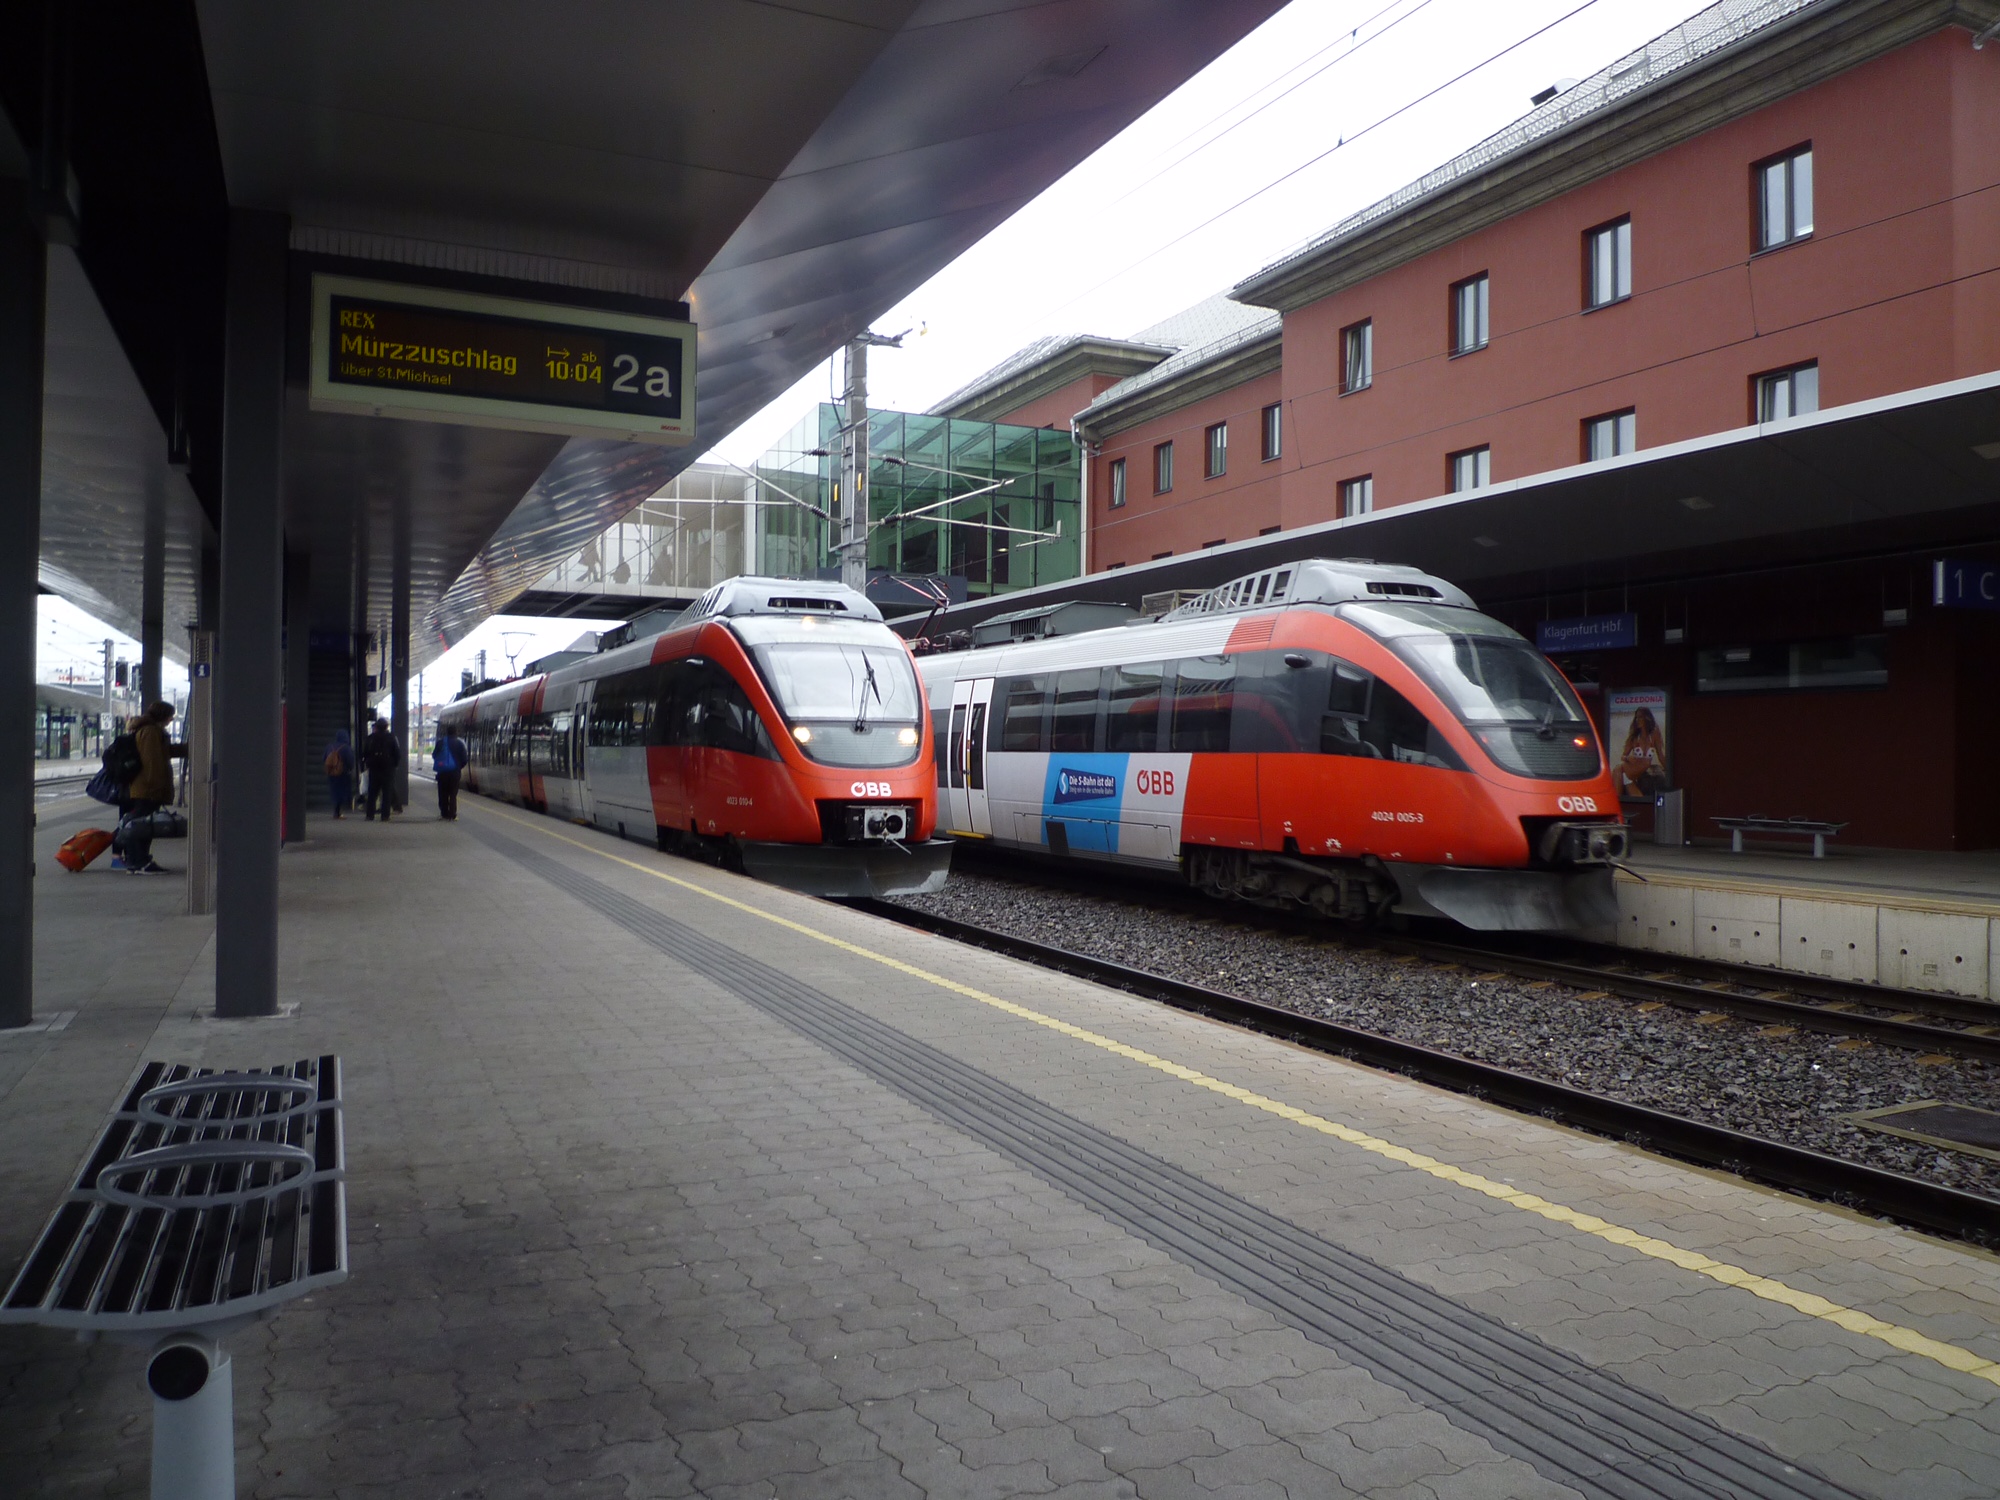 Trainspotter: Local trains at Klagenfurt. Entry doors level with the platform.